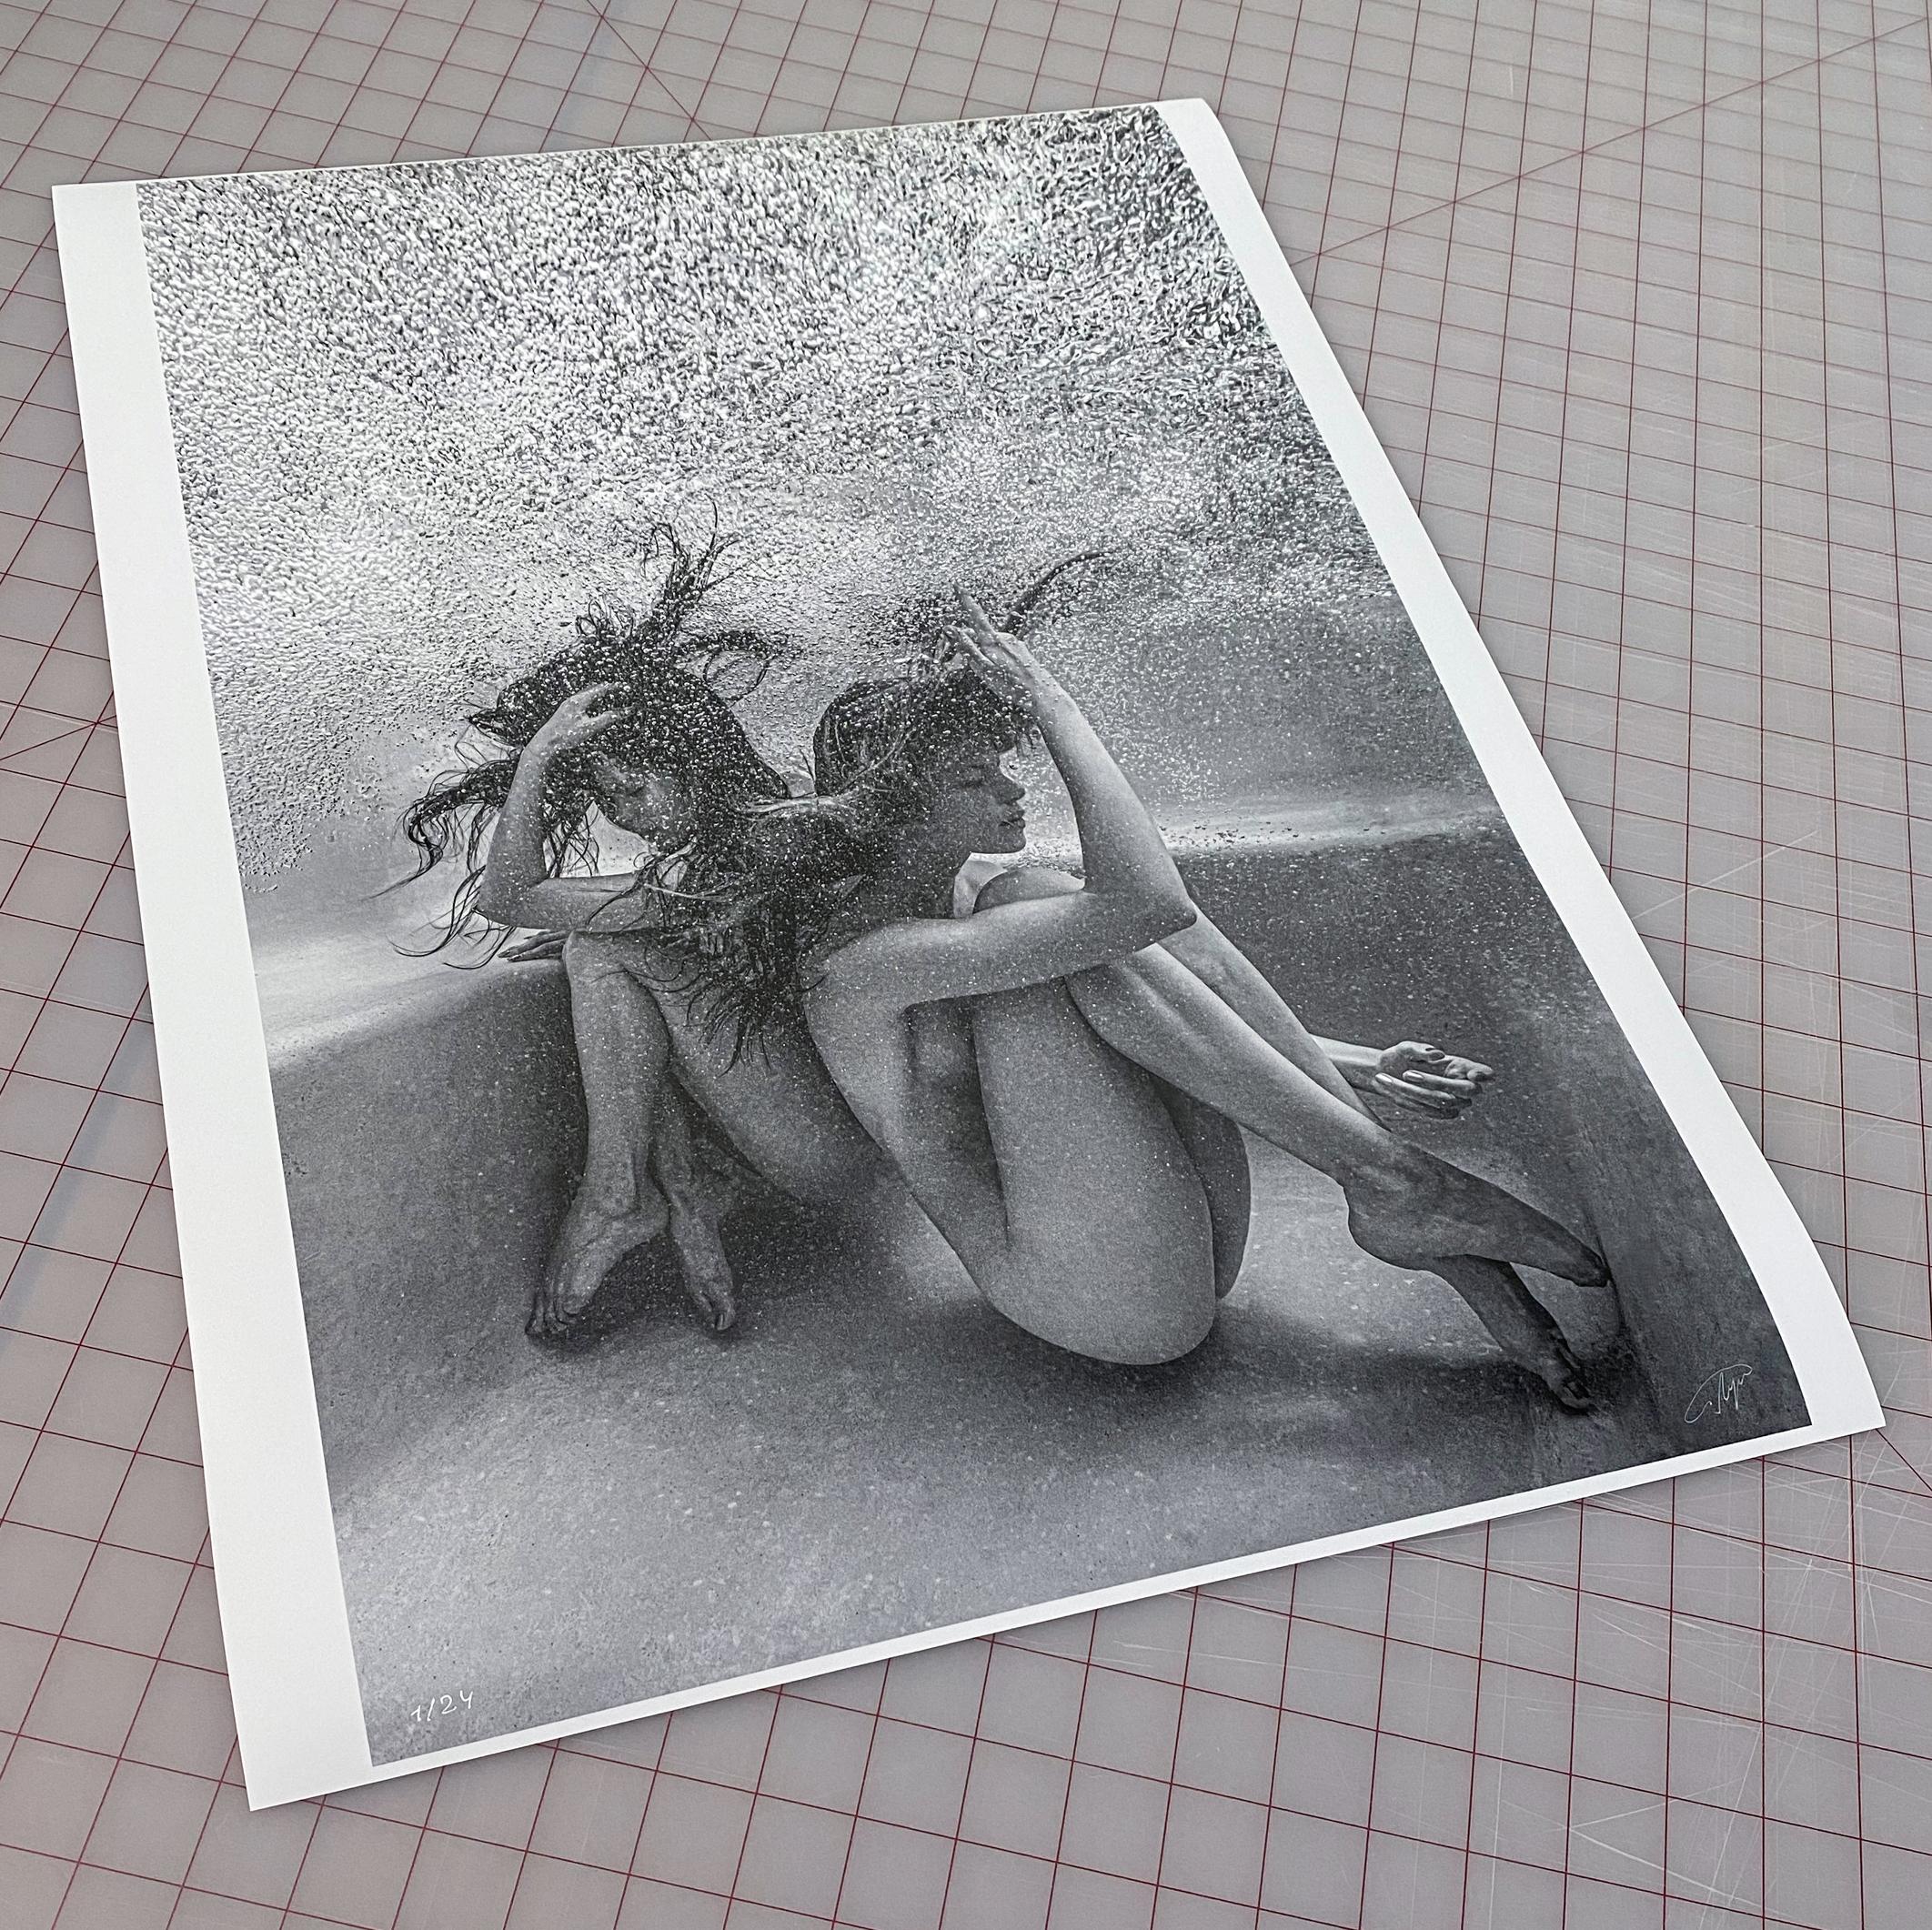 Friday Night - underwater black & white nude photograph - archival pigment 36x24 - Contemporary Photograph by Alex Sher